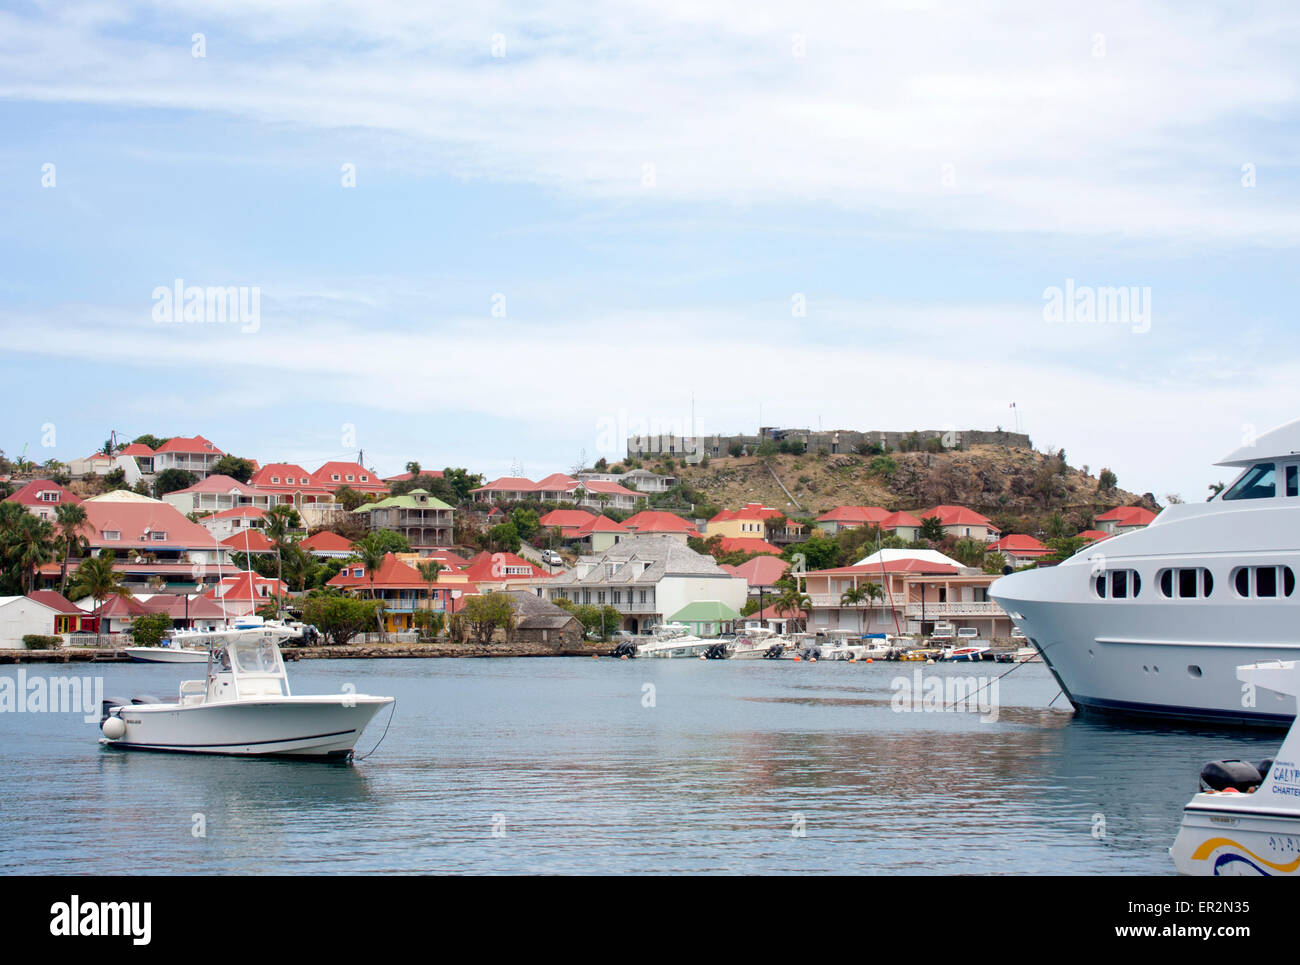 Boats and yachts anchored in the harbor of Gustavia, St. Barts Stock Photo